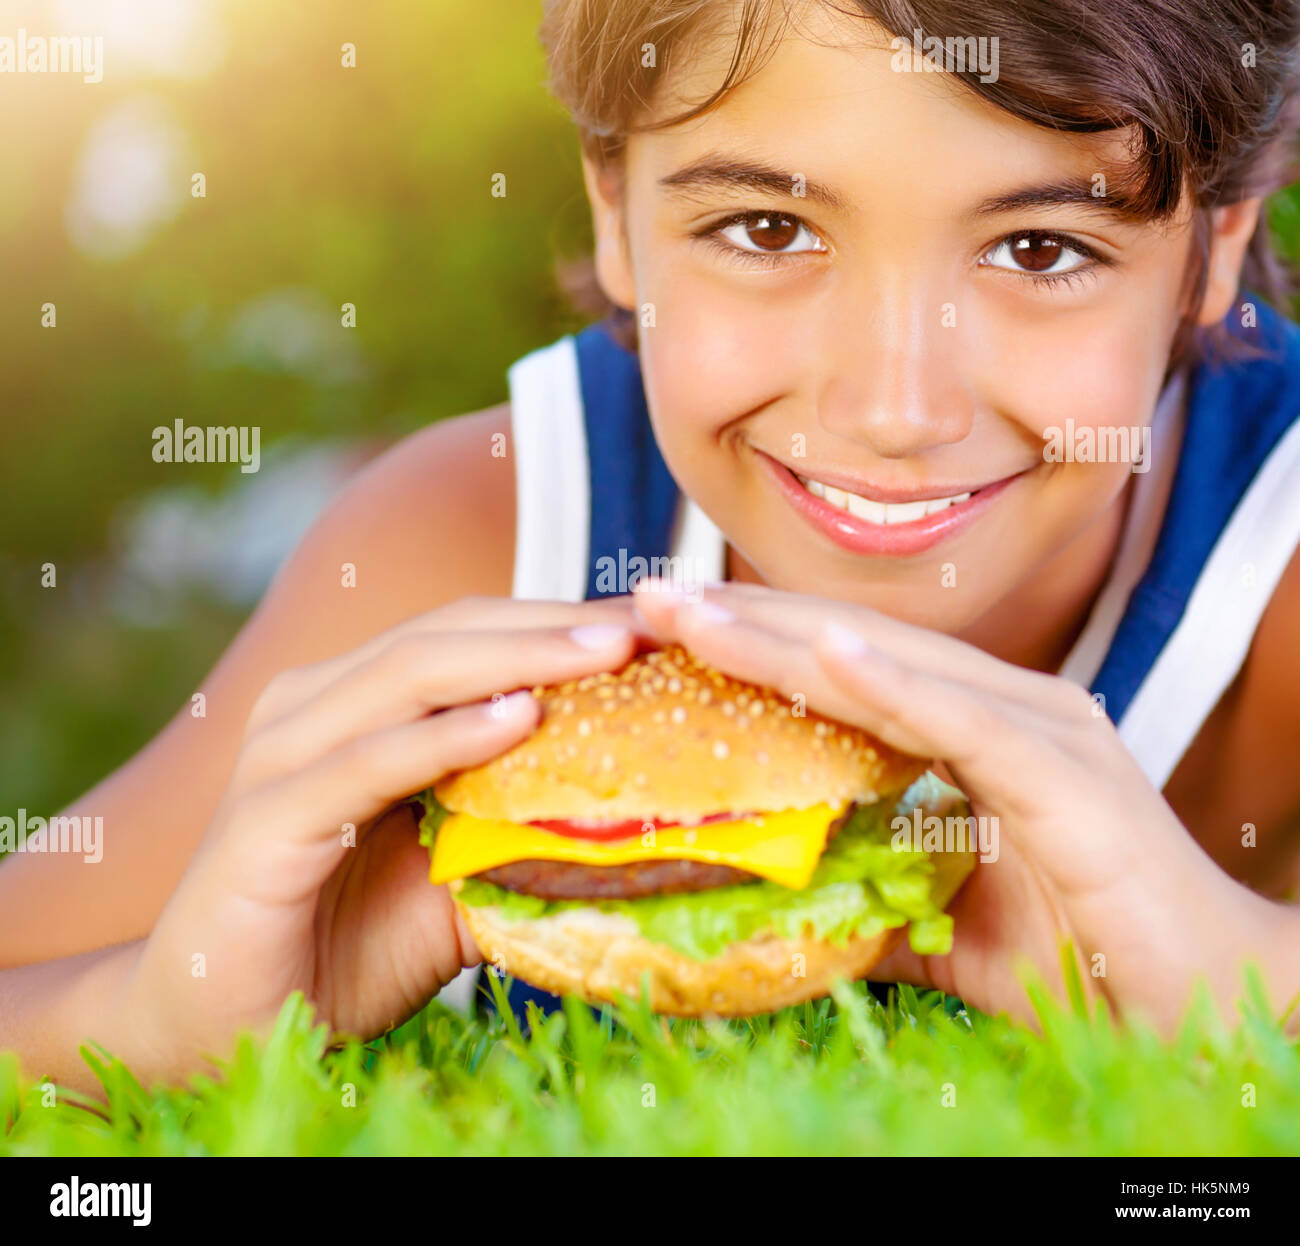 big, large, enormous, extreme, powerful, imposing, immense, relevant, summer, Stock Photo